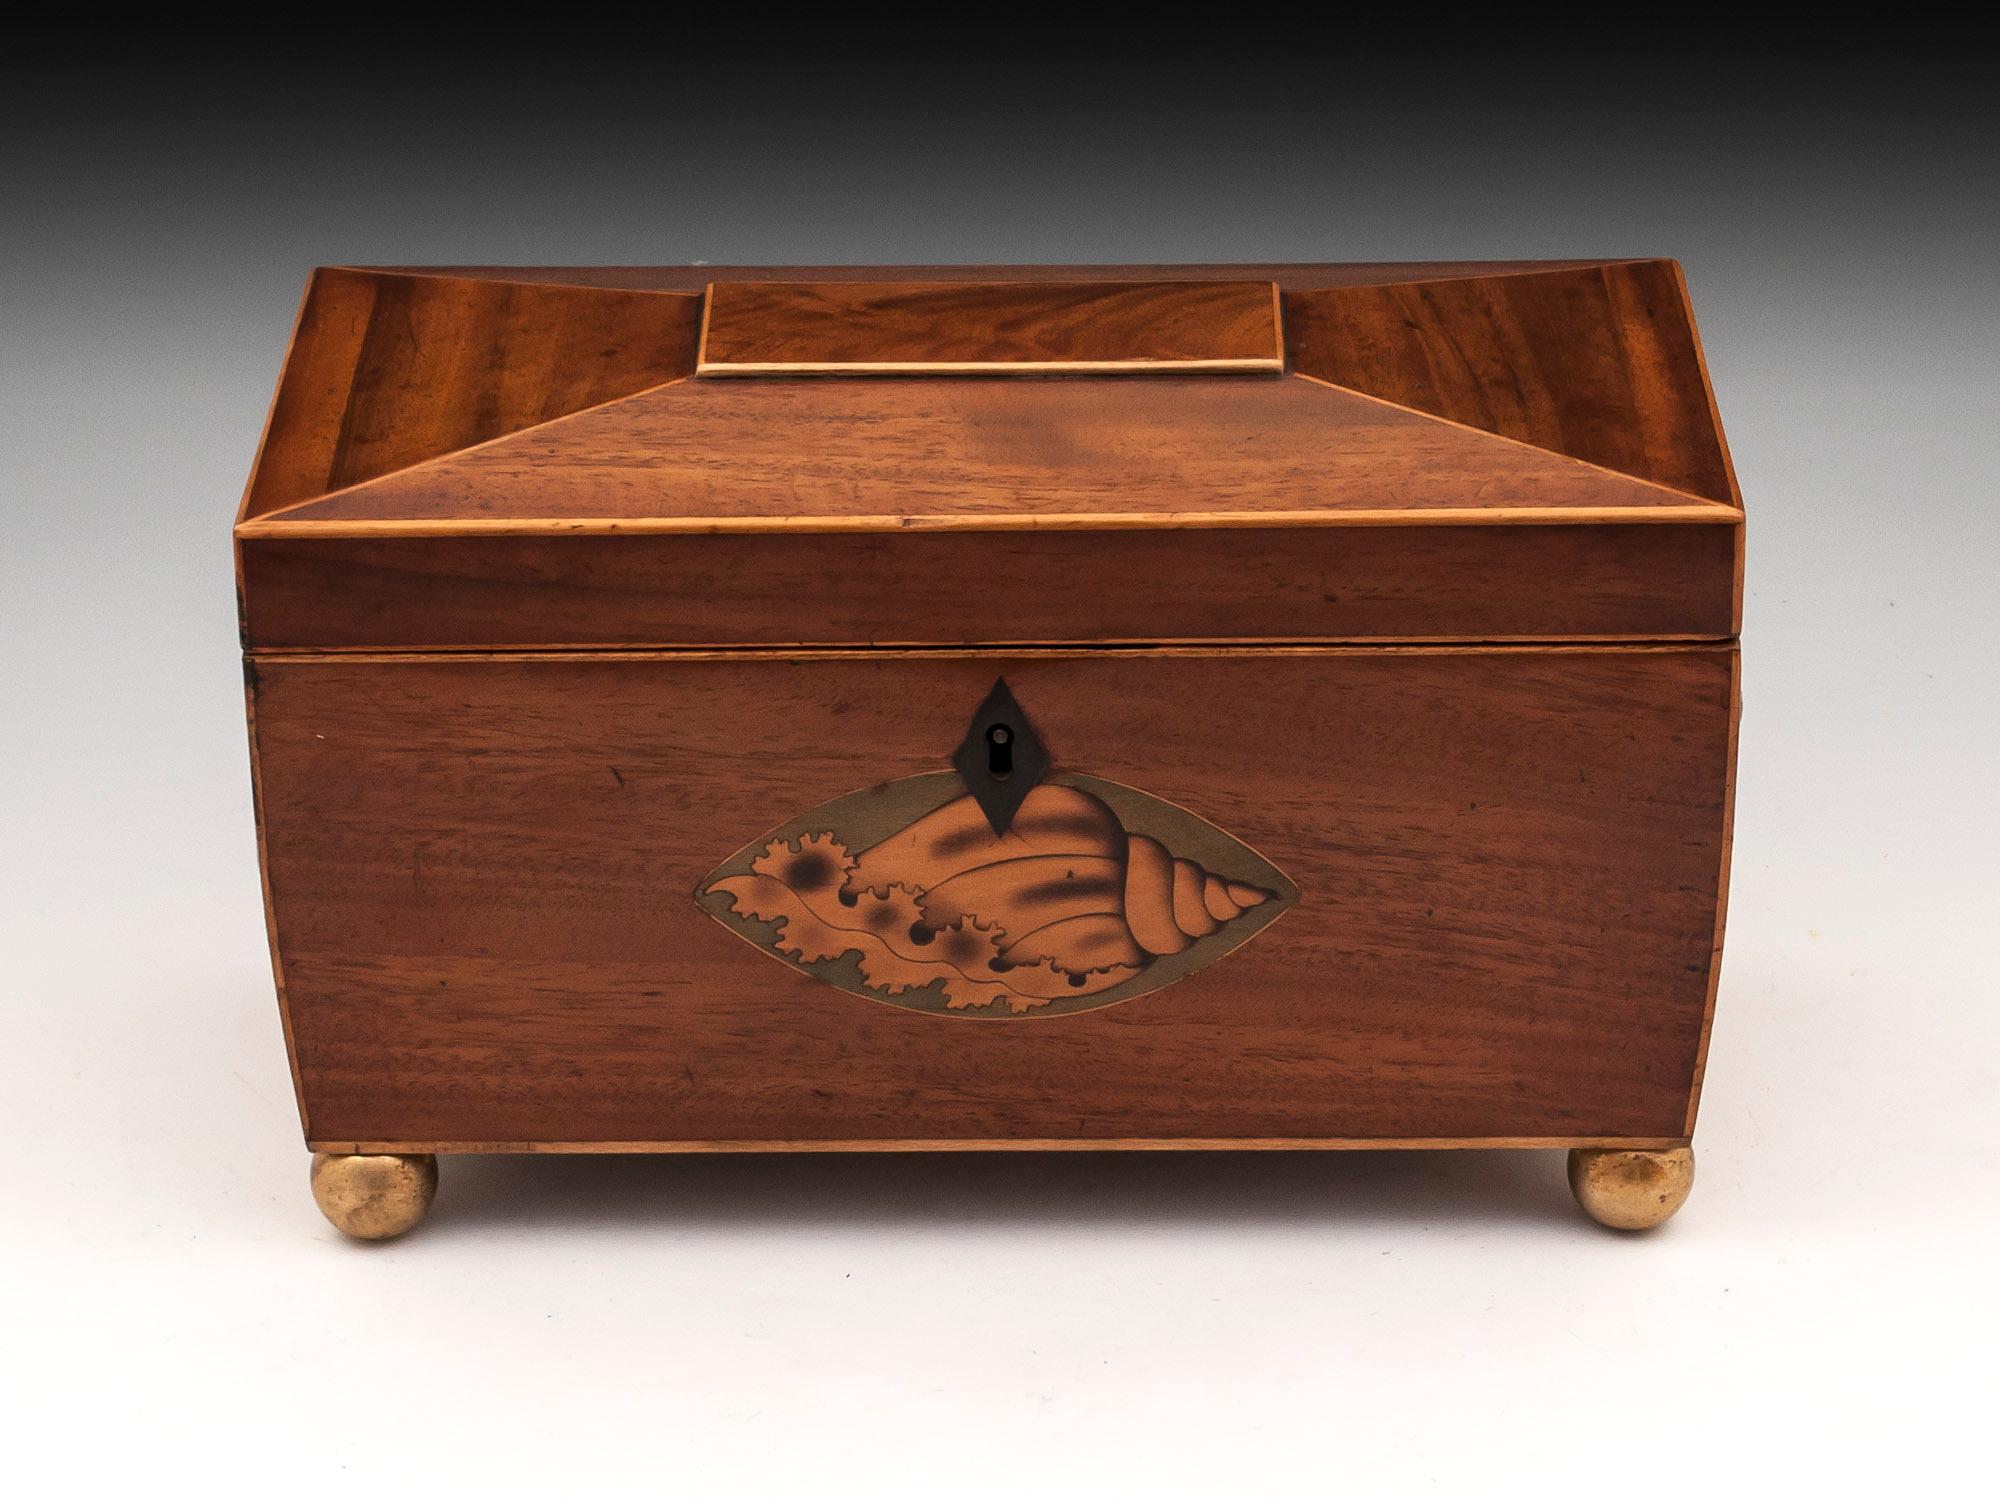 Antique tea caddy with boxwood edging and inlaid conch shell to the front. With double eagle brass handles and brass ball feet.
The interior contains two removable tea caddies and a vacant space for a mixing bowl.
  